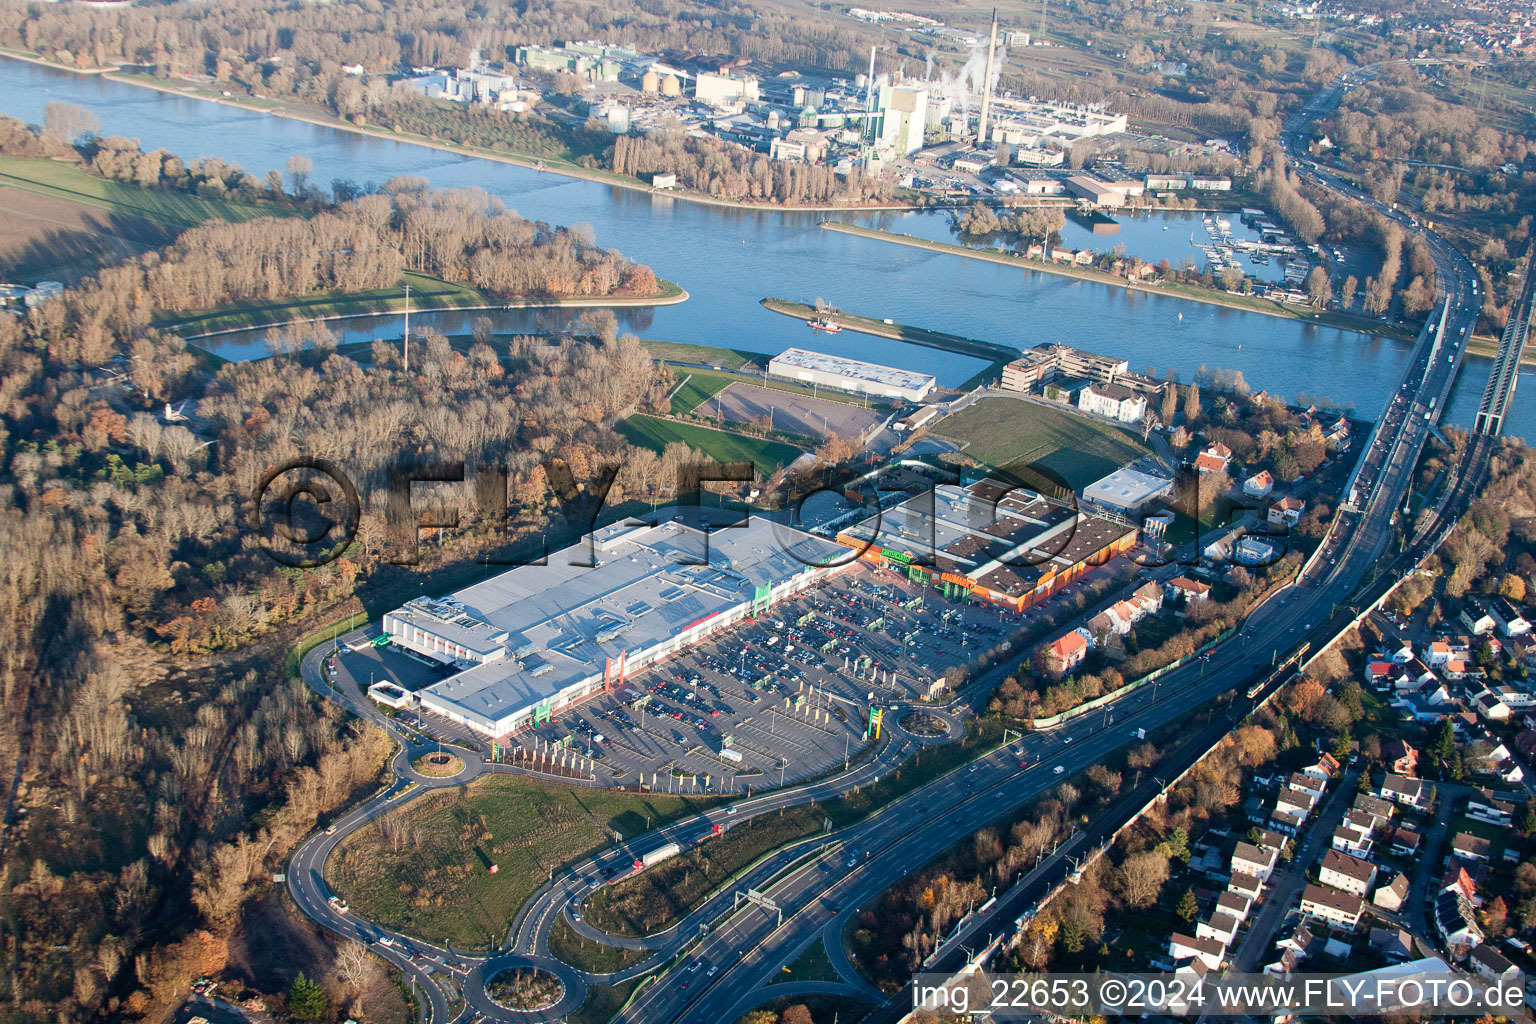 Aerial view of Luitpold Center in the district Maximiliansau in Wörth am Rhein in the state Rhineland-Palatinate, Germany